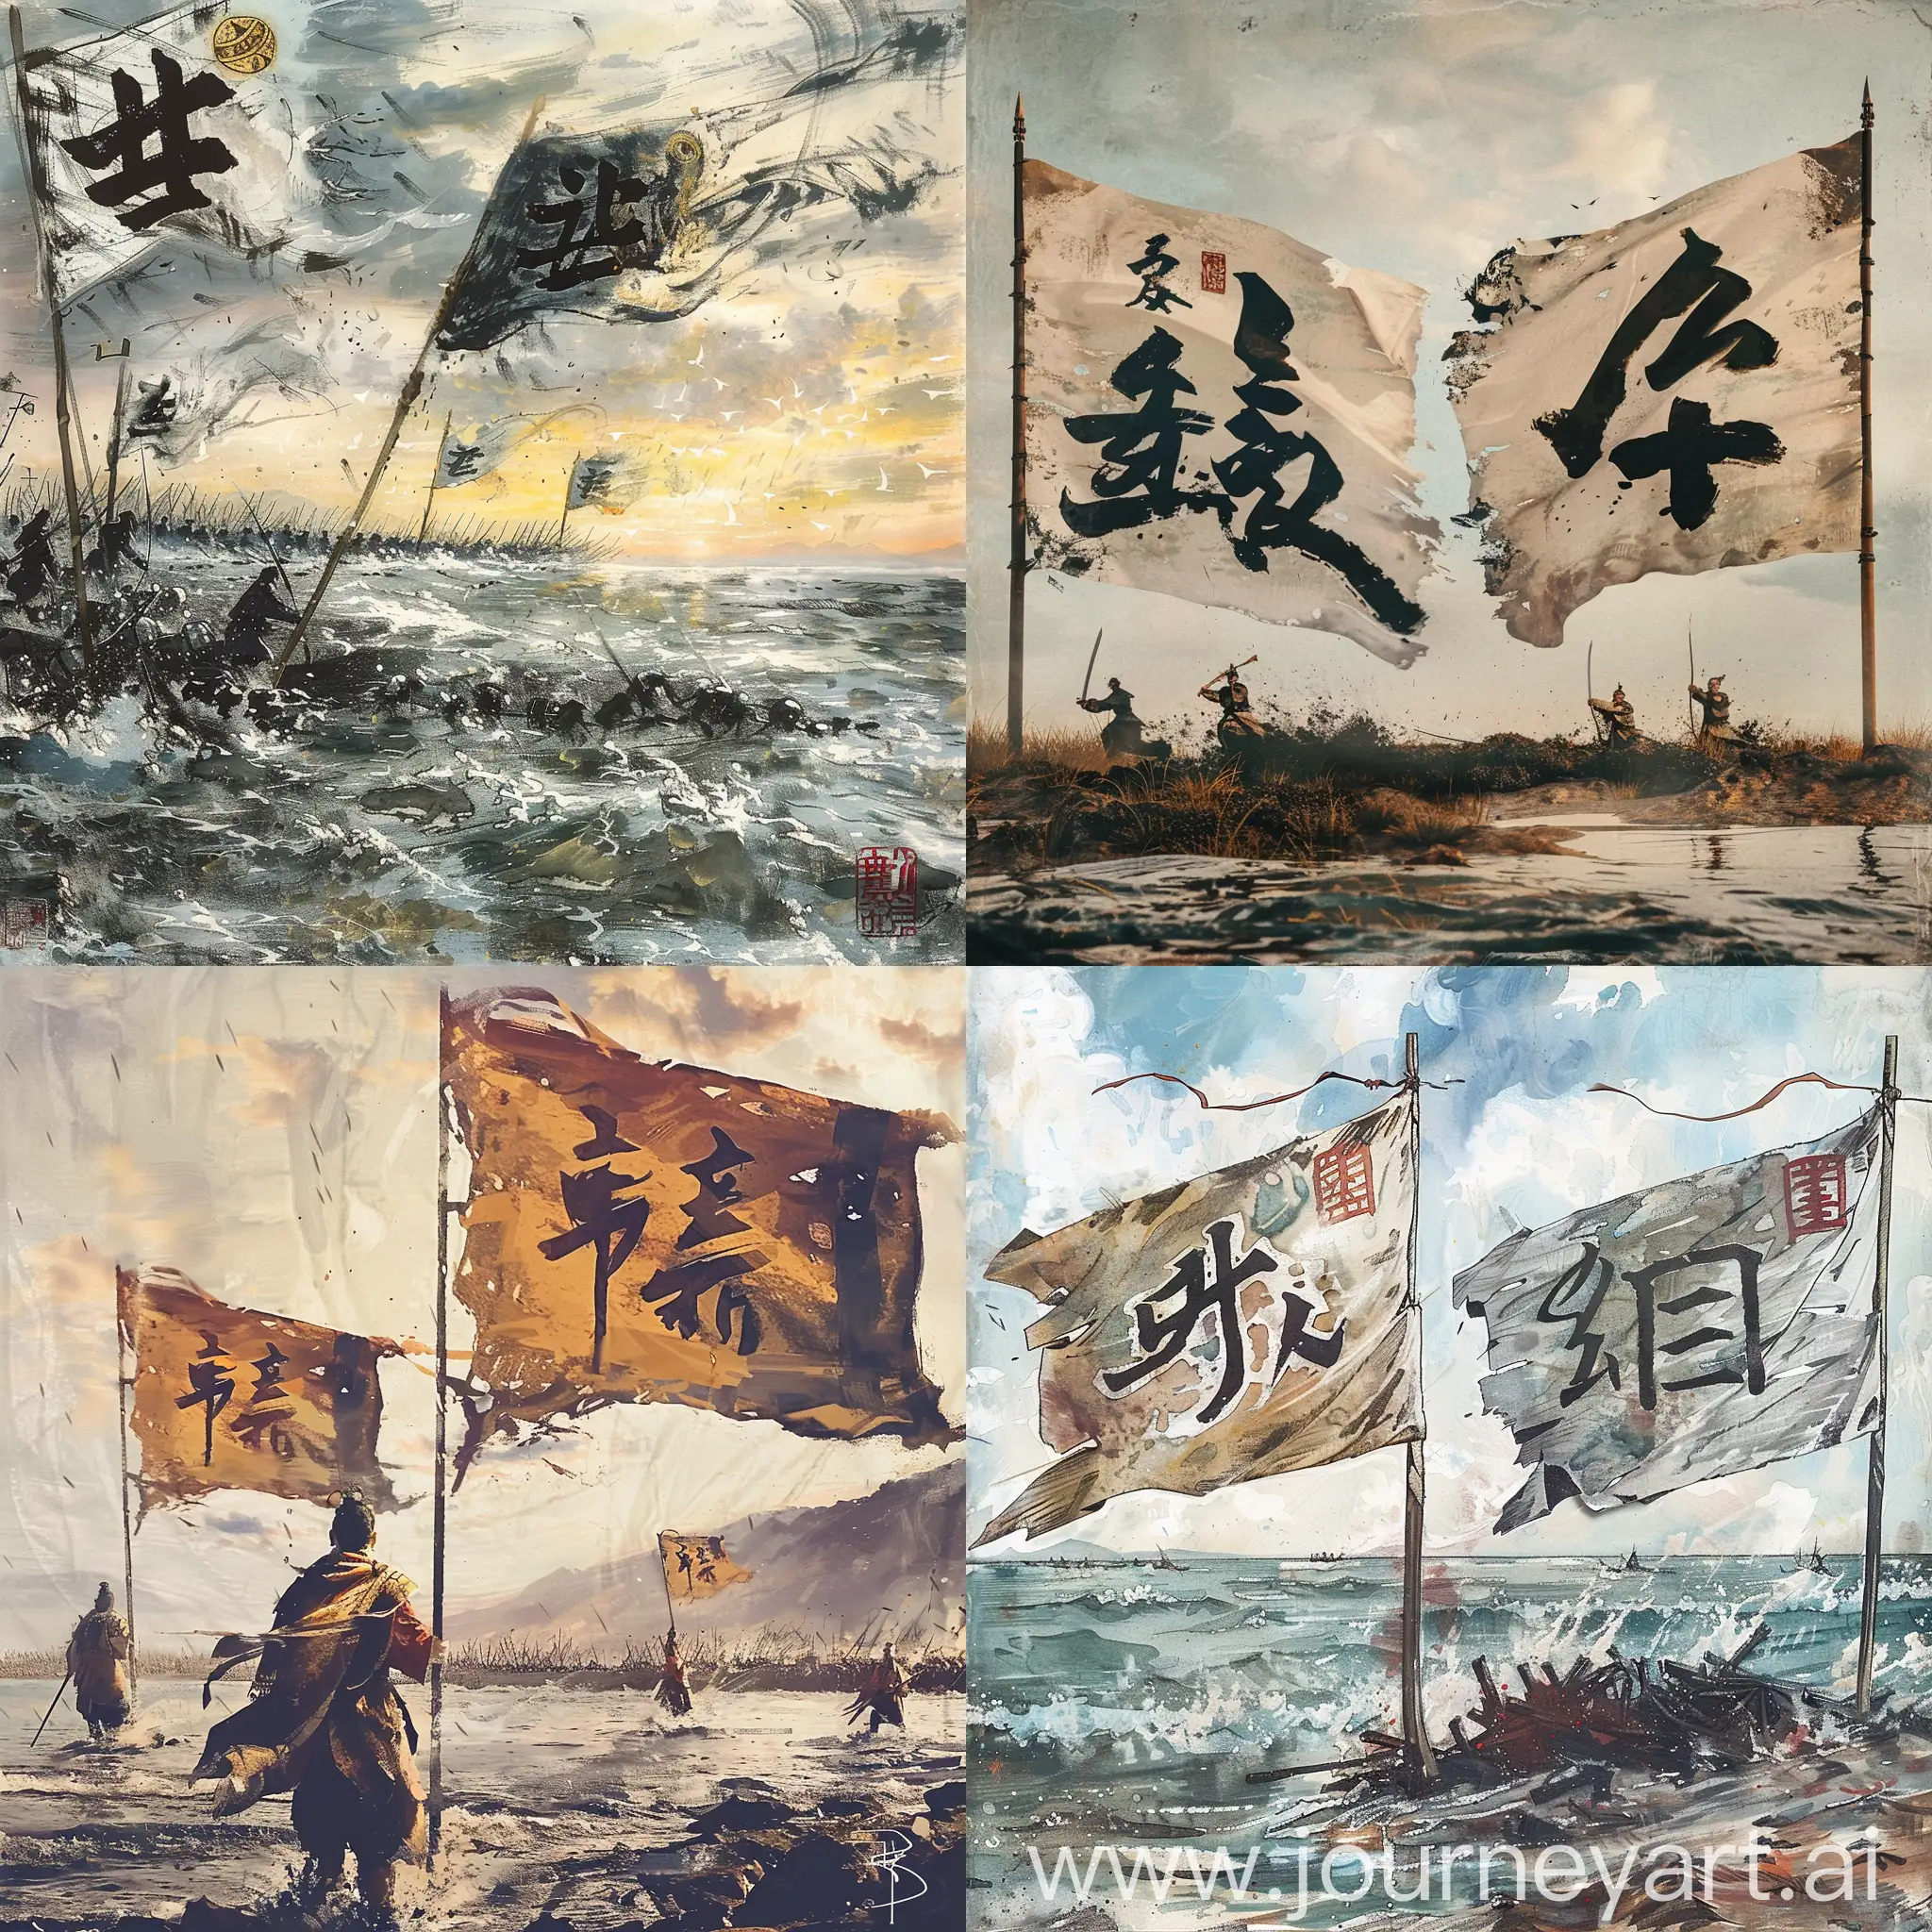 The historical background is Han Xin's decisive victory over the Zhao army in a battle where both sides were near water. Each army had their respective flags. One flag bore the traditional Chinese characters for "Han," while the other bore the traditional Chinese characters for "Zhao."